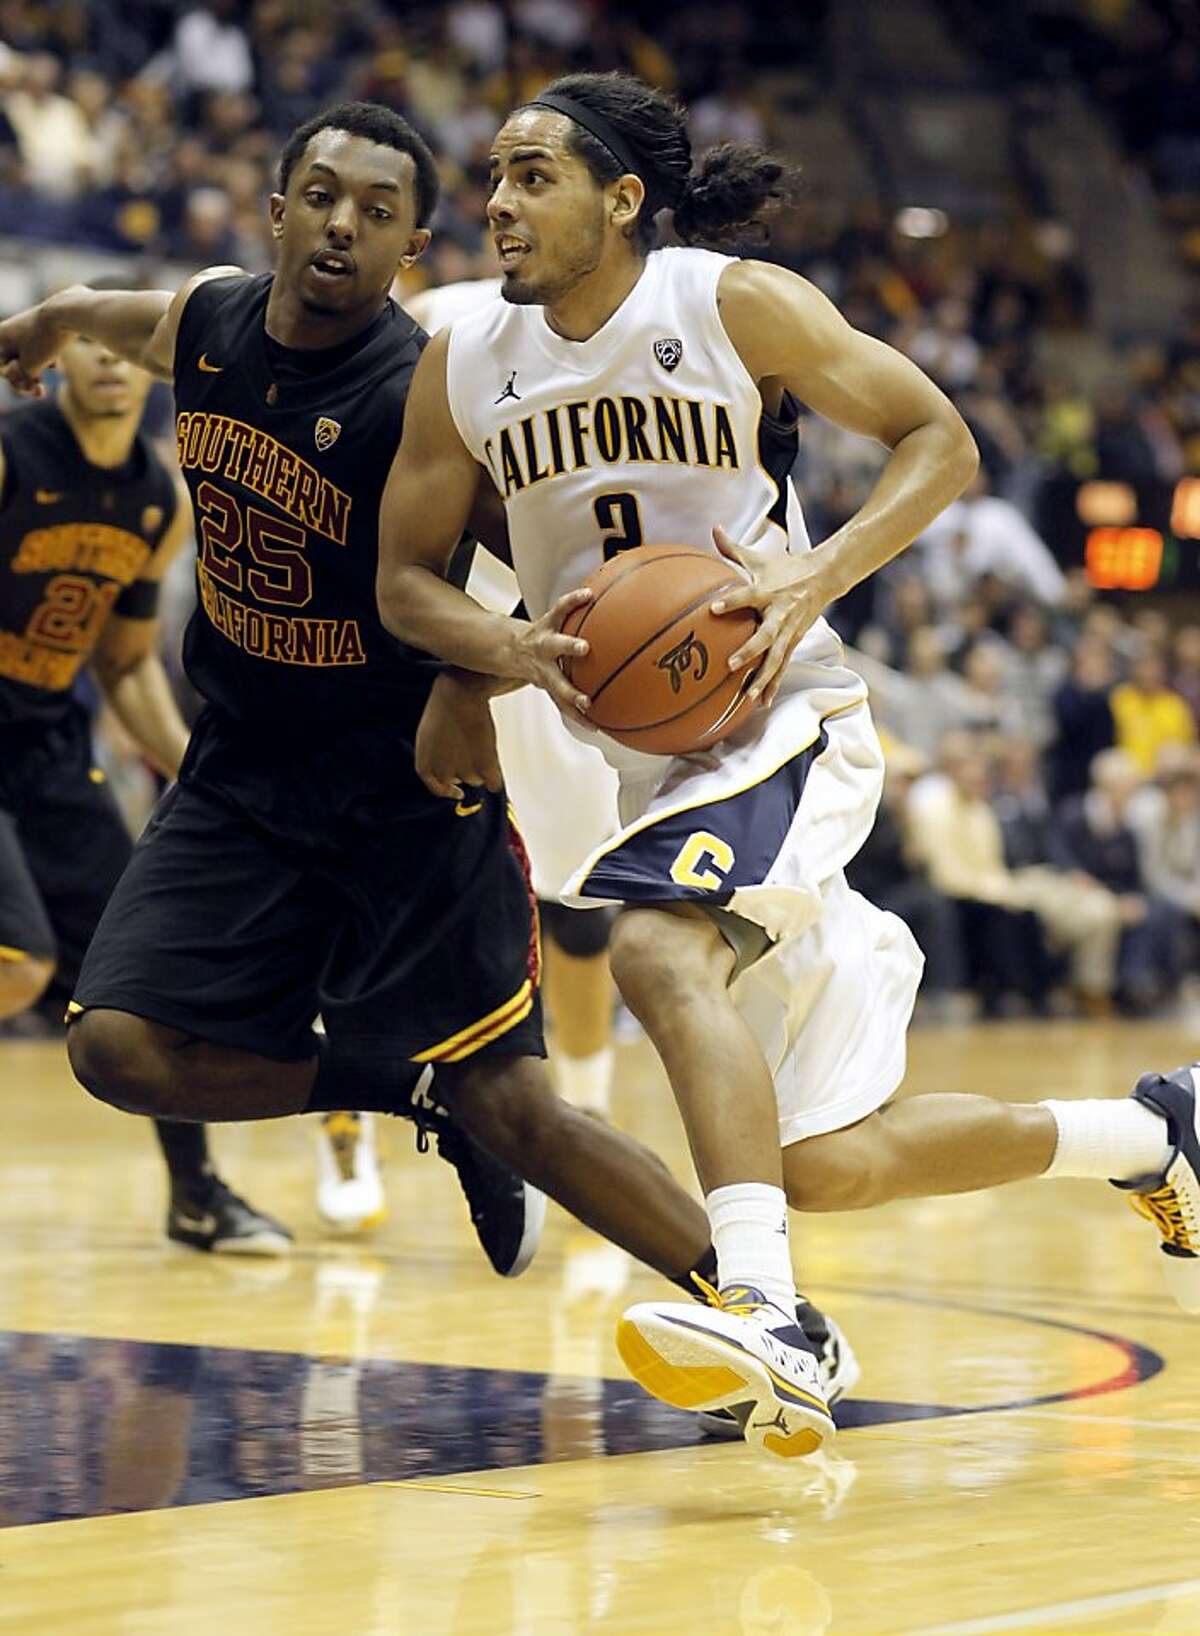 Cal's Jorge Gutierrez, (2) dtrives past, USC's Byron Wesley, (25) in the second half, as the California Golden Bears go on to beat the USC Trojans 53-49, at Haas Pavilion on the UC Berkeley campus on Thursday December 29, 2011 in Berkeley, Ca.